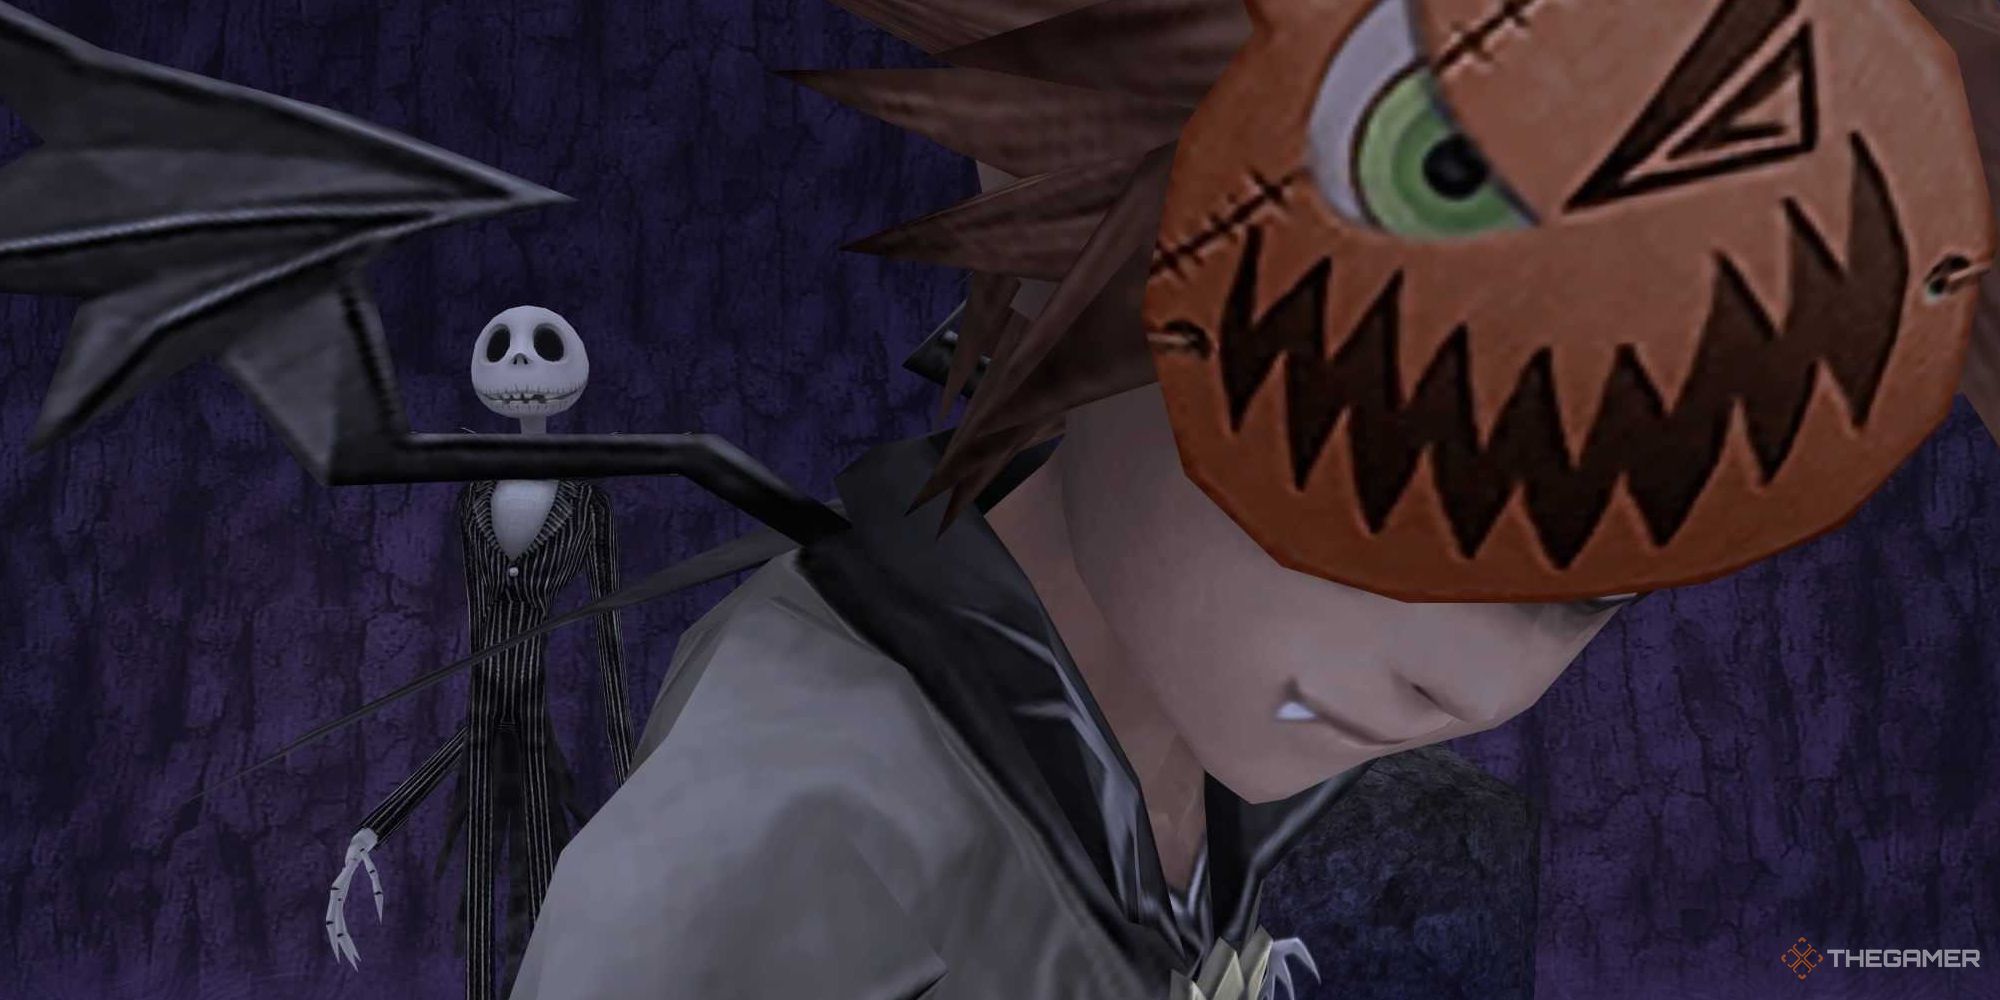 Sora in Nightmare Before Christmas costume looking down while Jack Skellington stands in the background